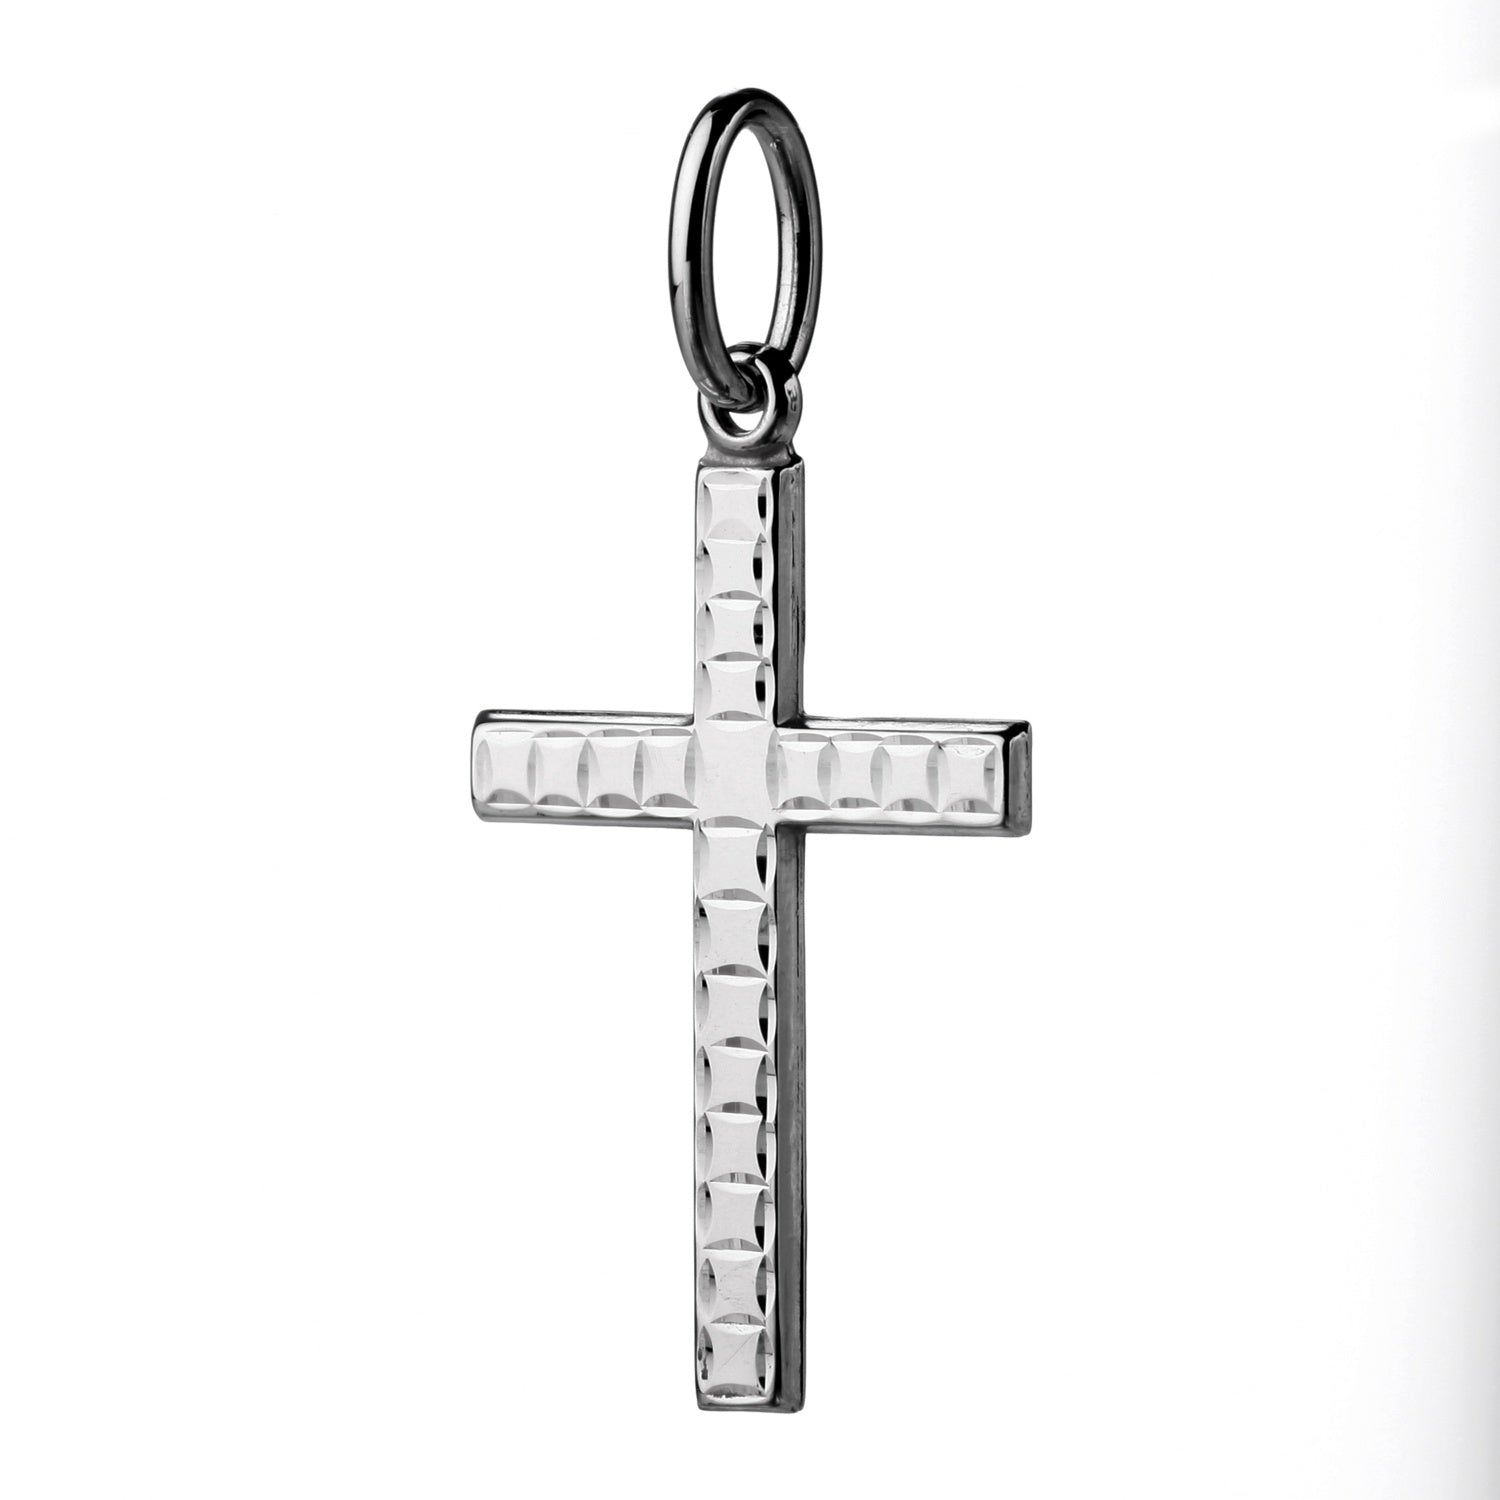 925 STERLING SILVER CLASSIC CROSS PENDANT WITH DIAMOND CUT 35.0 MM. F41643